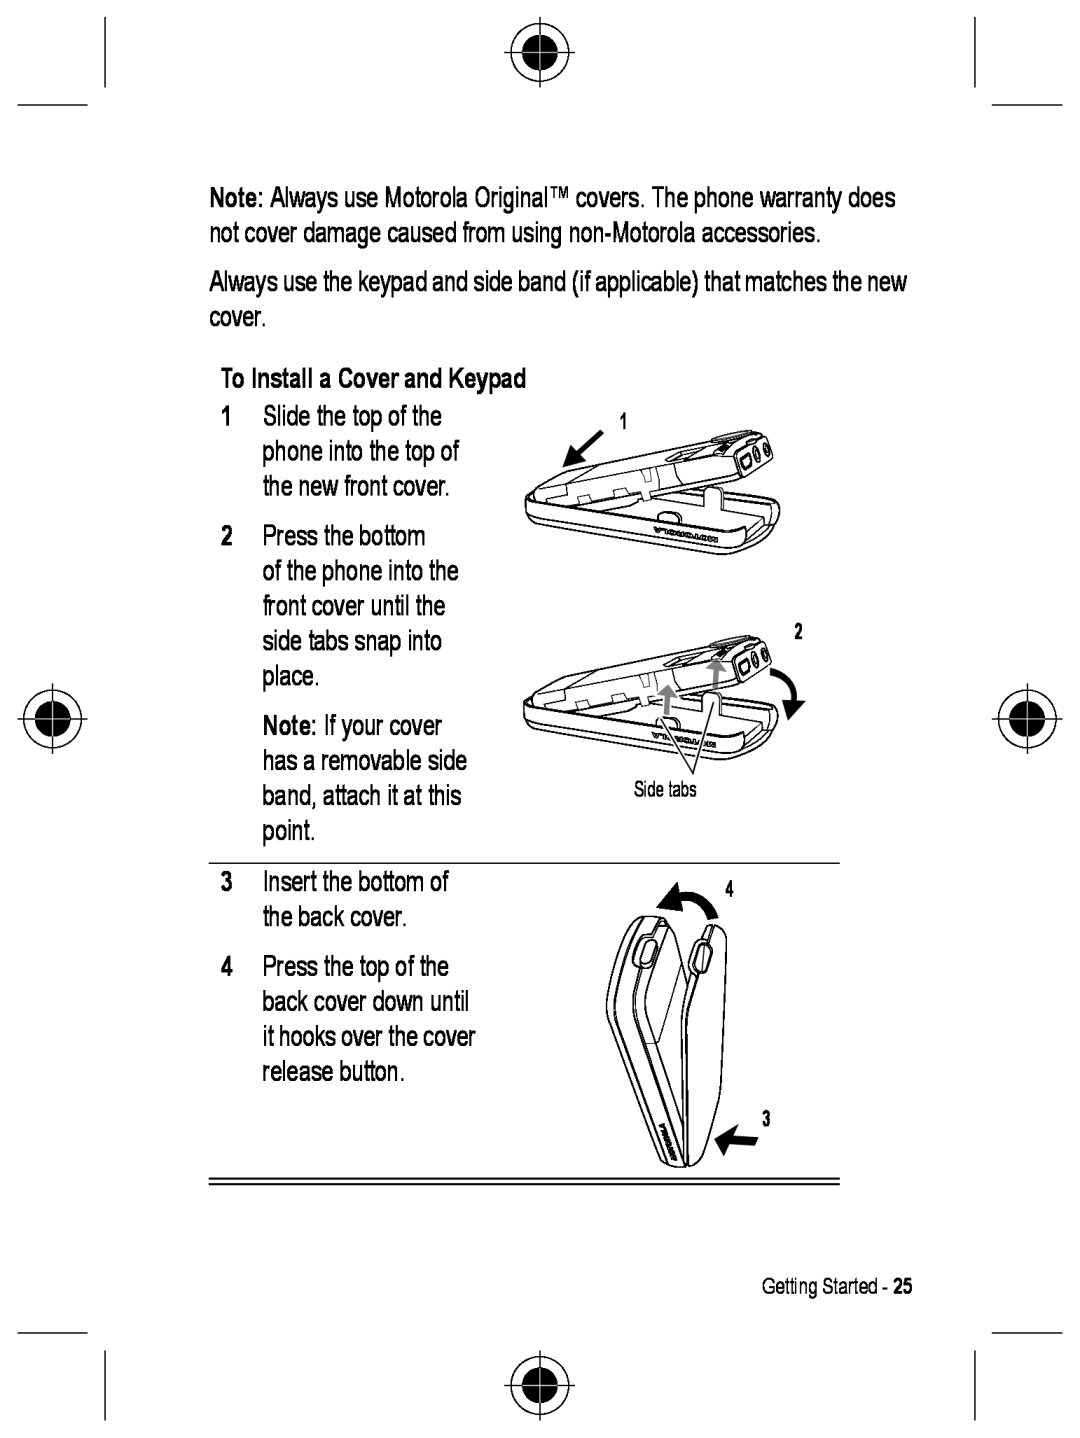 Motorola C330 manual To Install a Cover and Keypad 